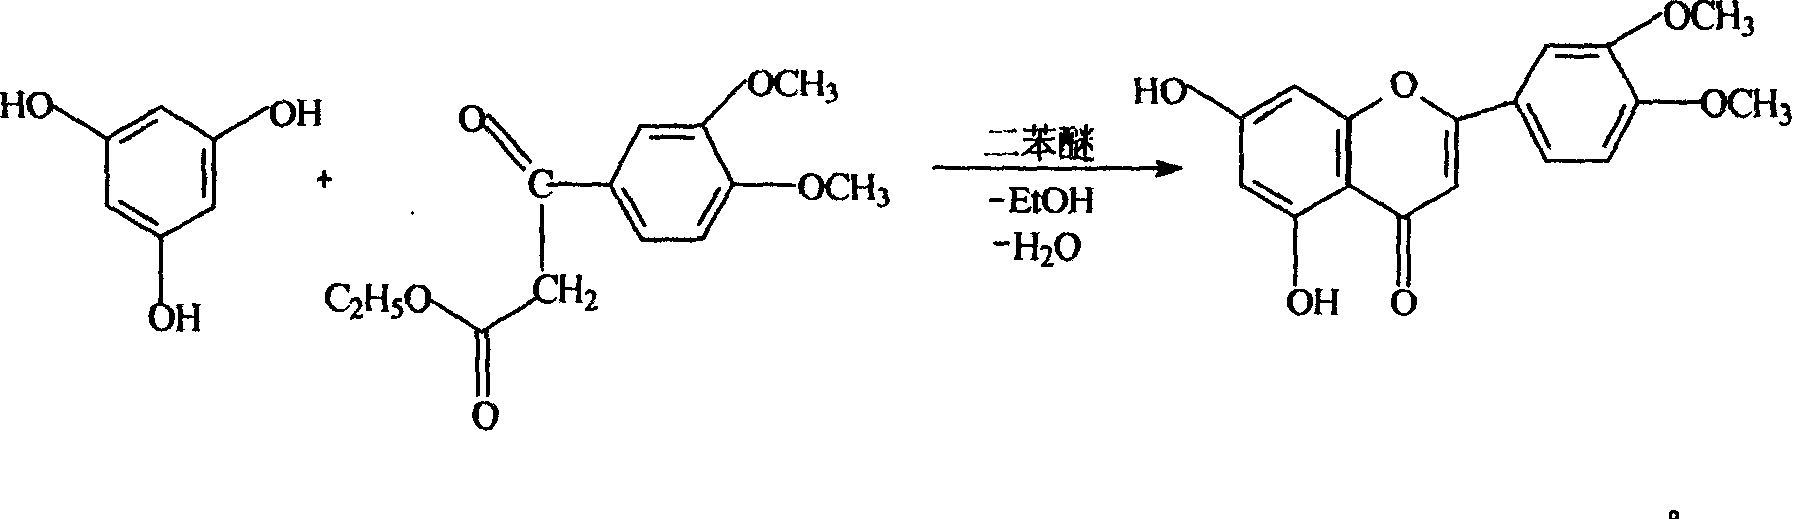 Process for synthesizing luteolin